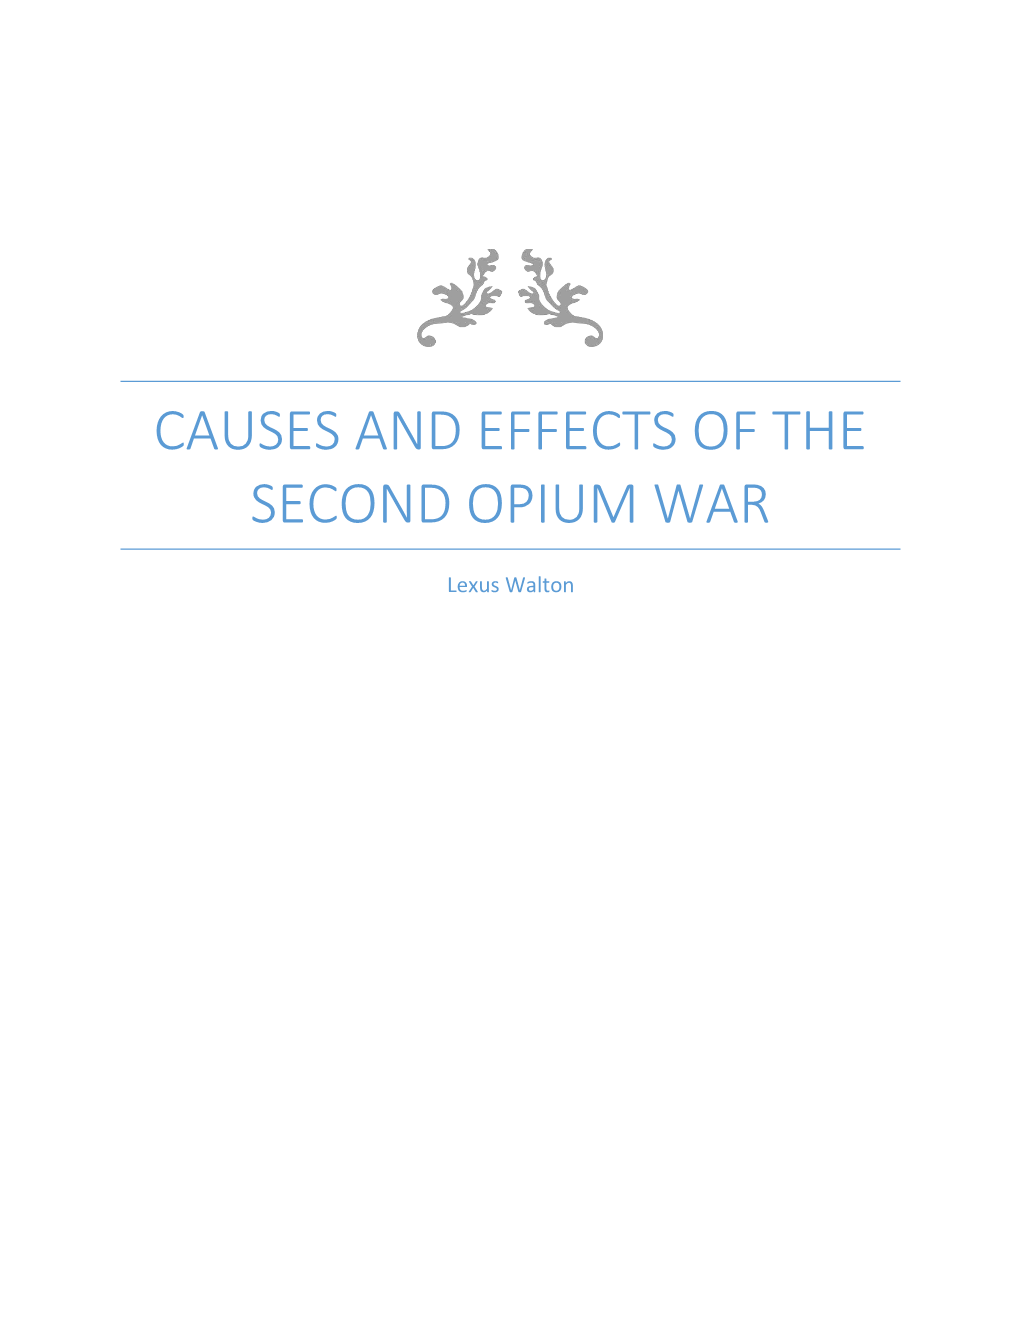 CAUSES and EFFECTS of the Second Opium War